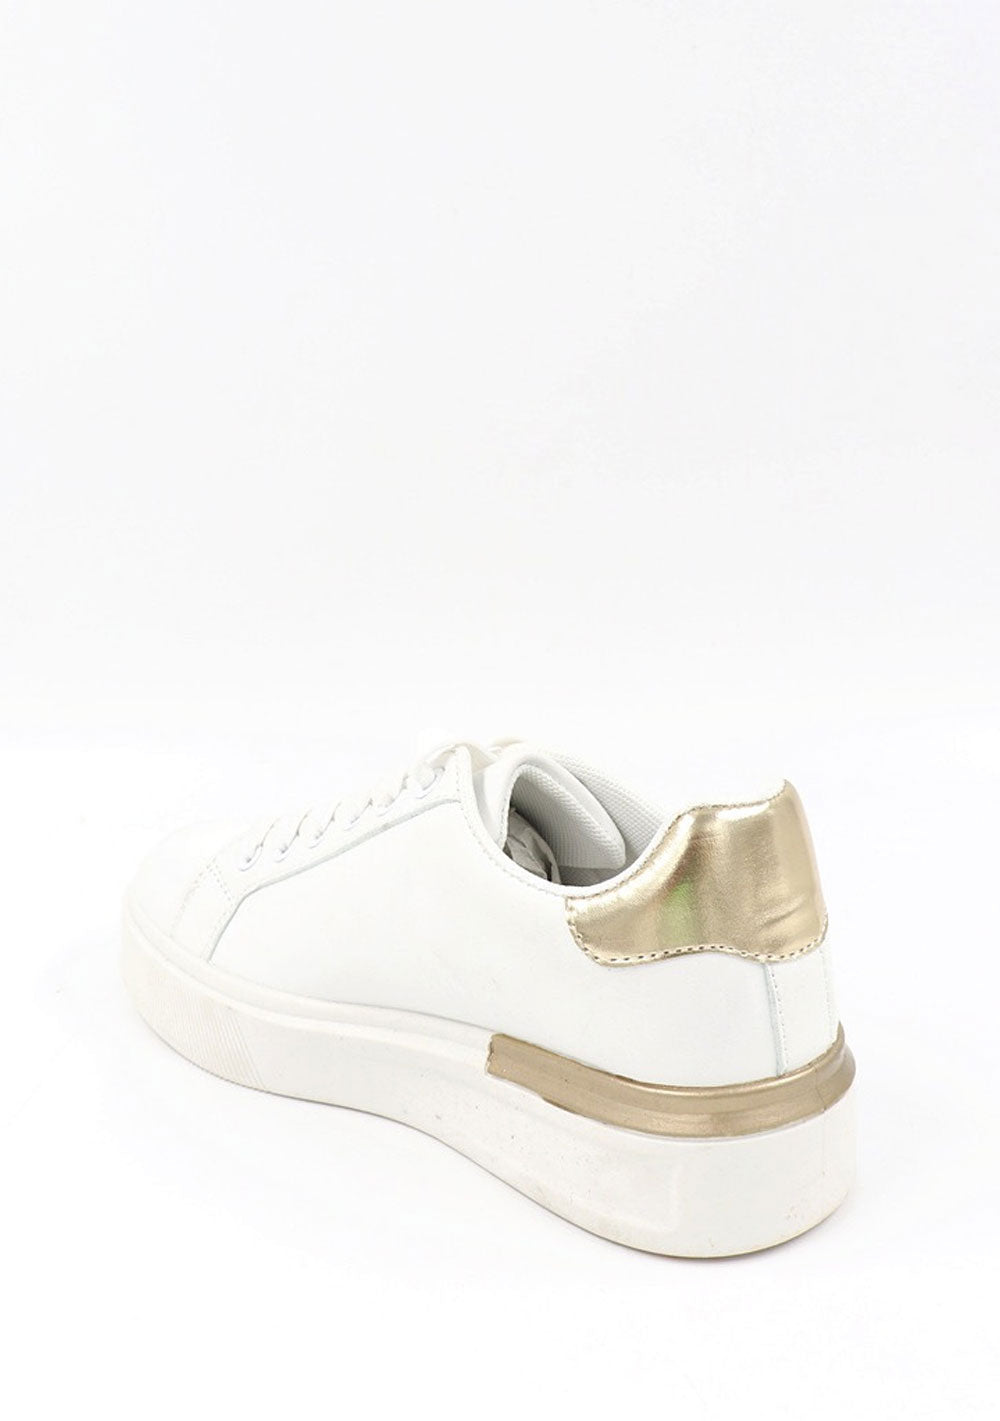 ♡ Sneakers mit Gold-Details